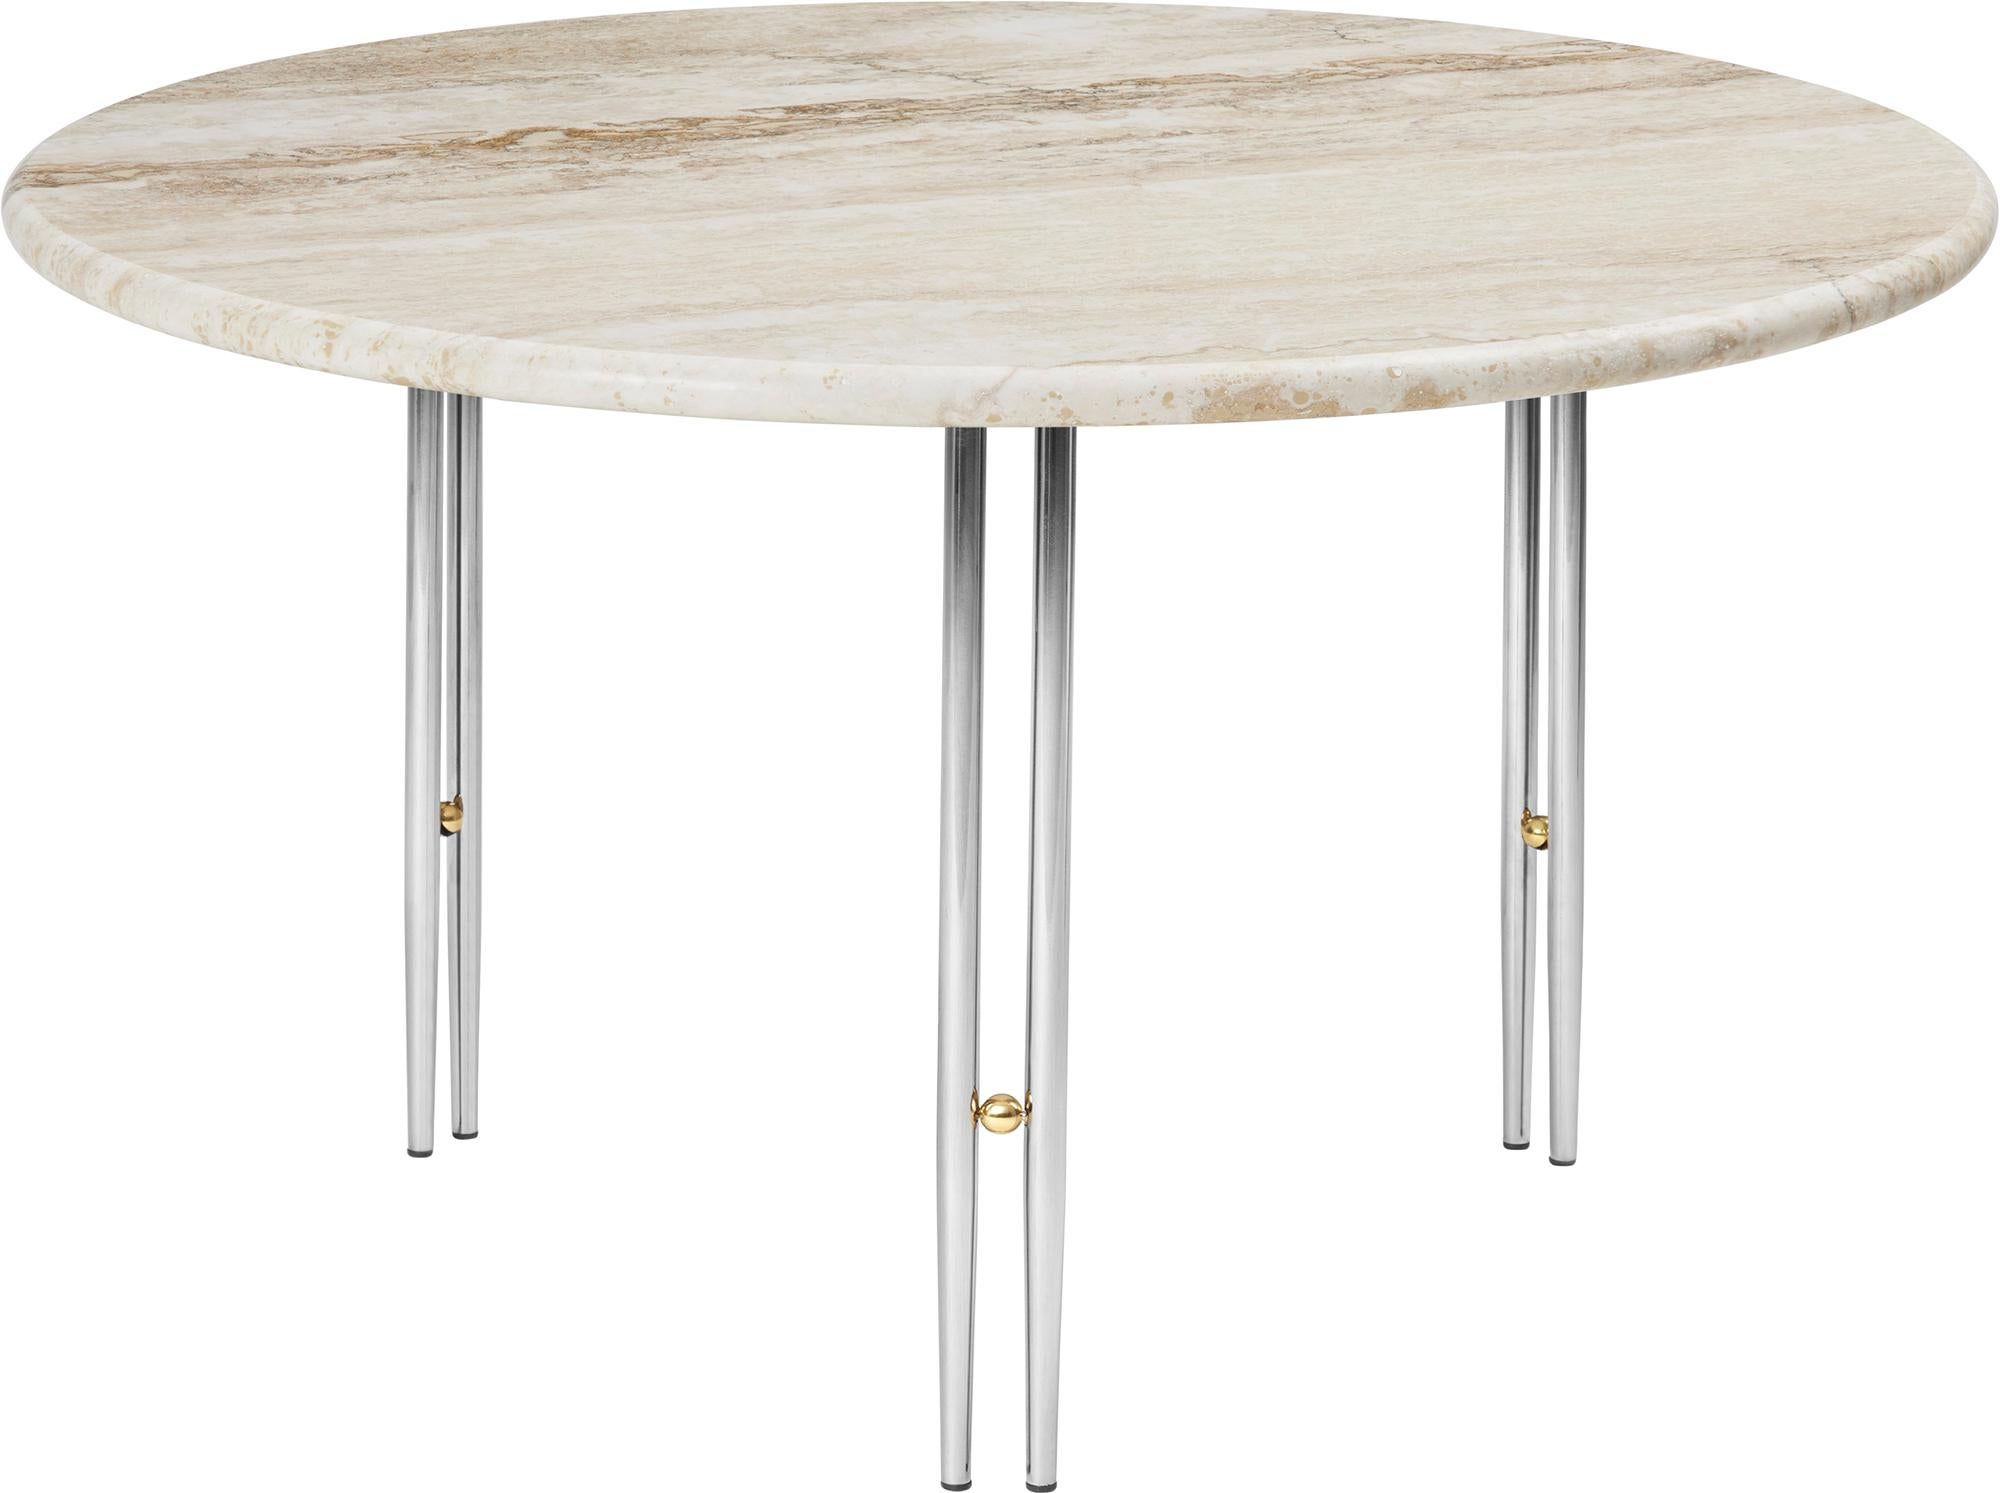 ‘IOI’ Travertine Side Table by GamFratesi for GUBI For Sale 7